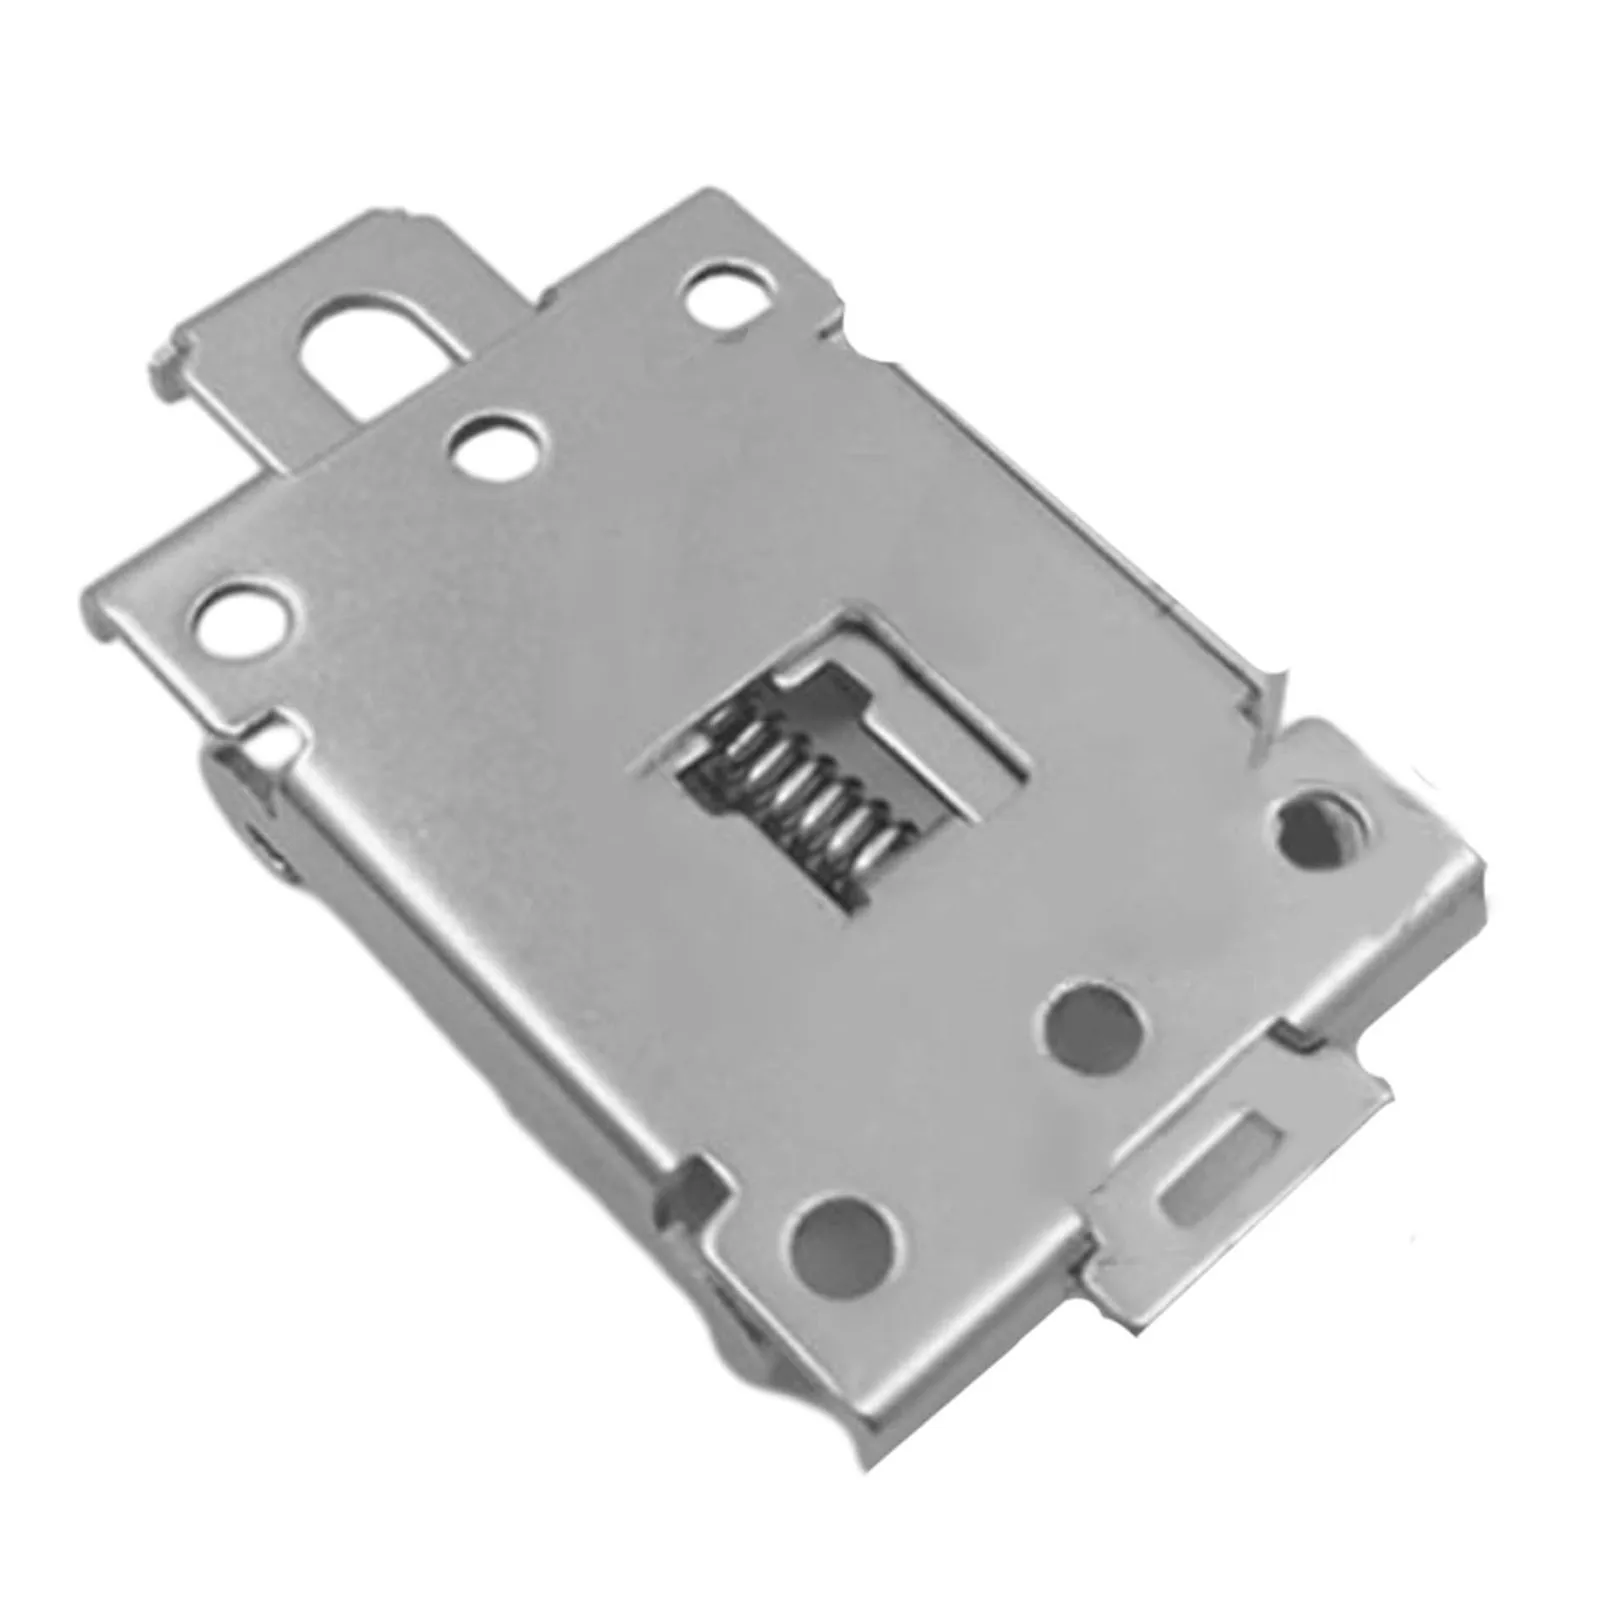 

Durable Aluminum Alloy Bracket for 35mm DIN Rail Secure Mounting Solution for Solid State Relay Power Switches